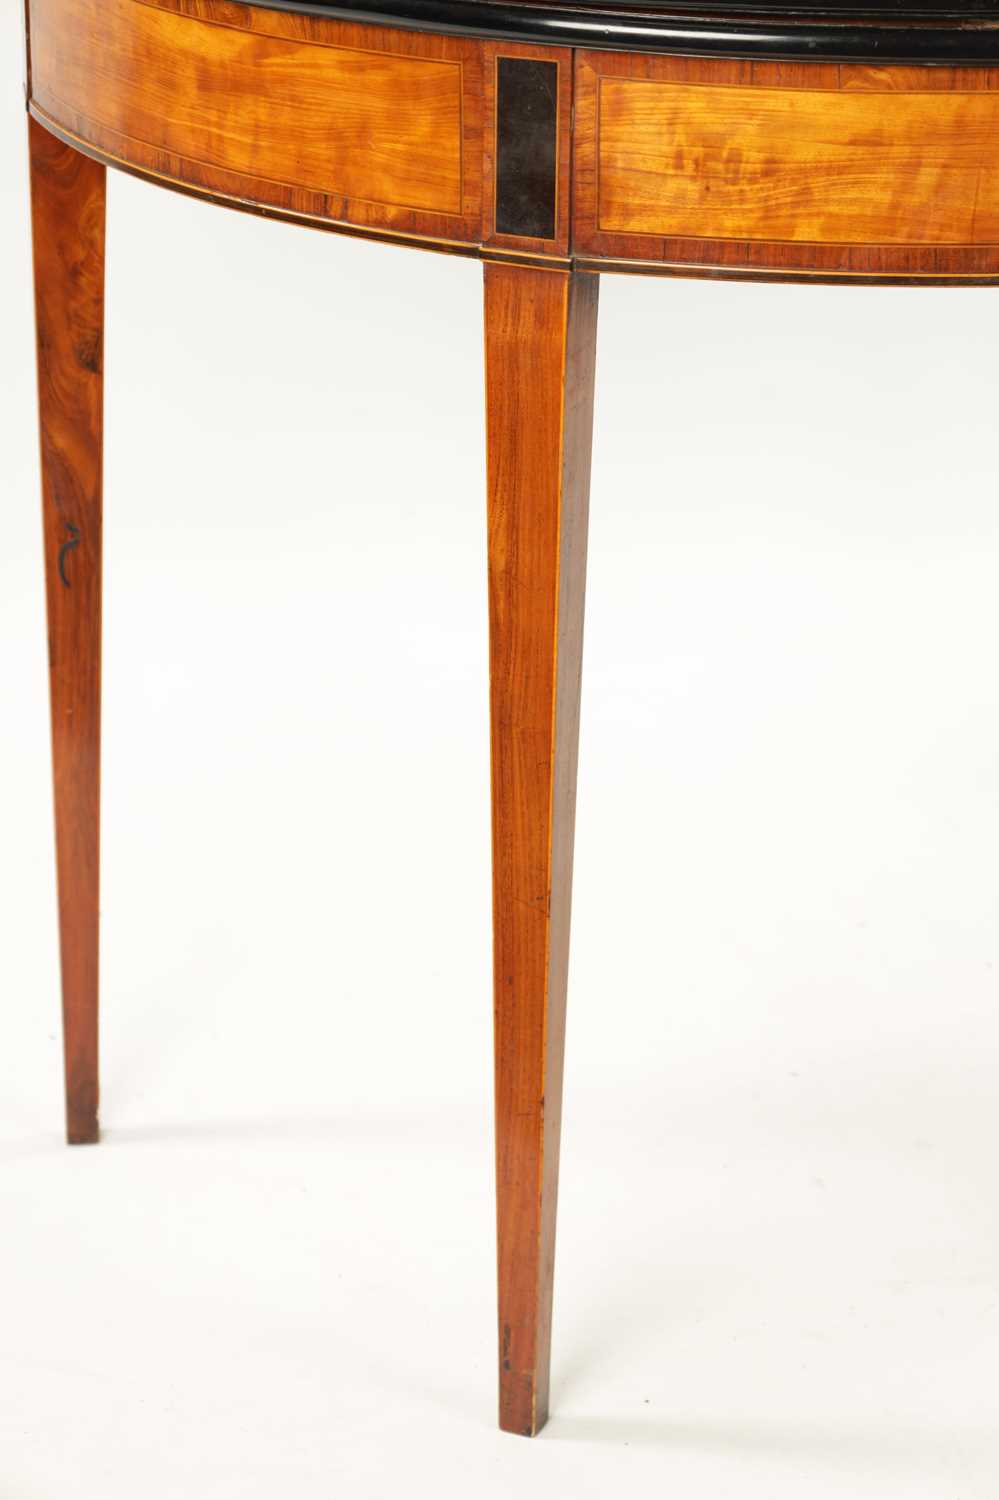 A GEORGE III SATINWOOD AND INLAID EBONISED DEMI LUNE FOLD OVER CARD TABLE - Image 5 of 10